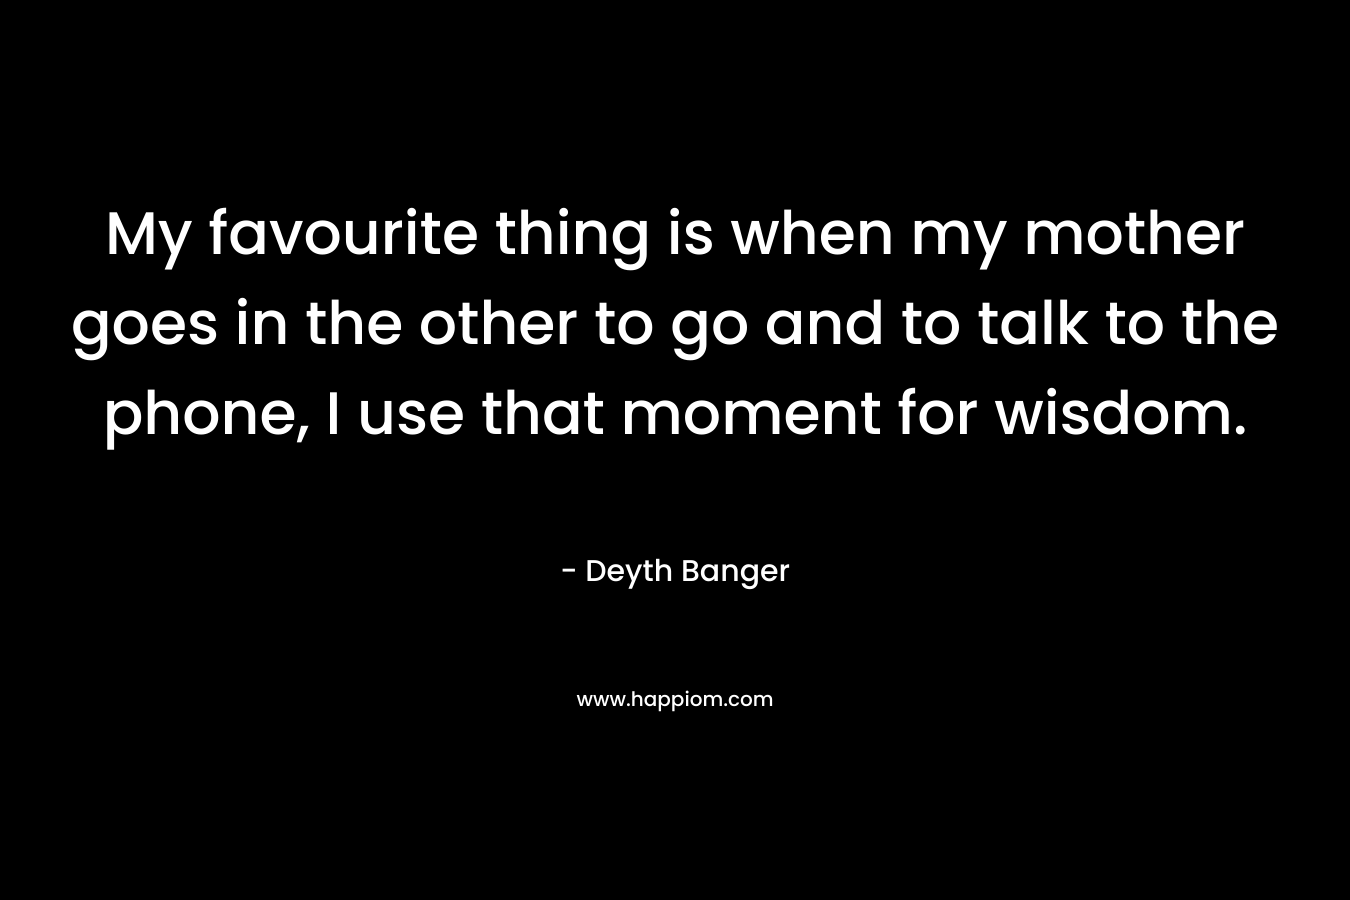 My favourite thing is when my mother goes in the other to go and to talk to the phone, I use that moment for wisdom. – Deyth Banger